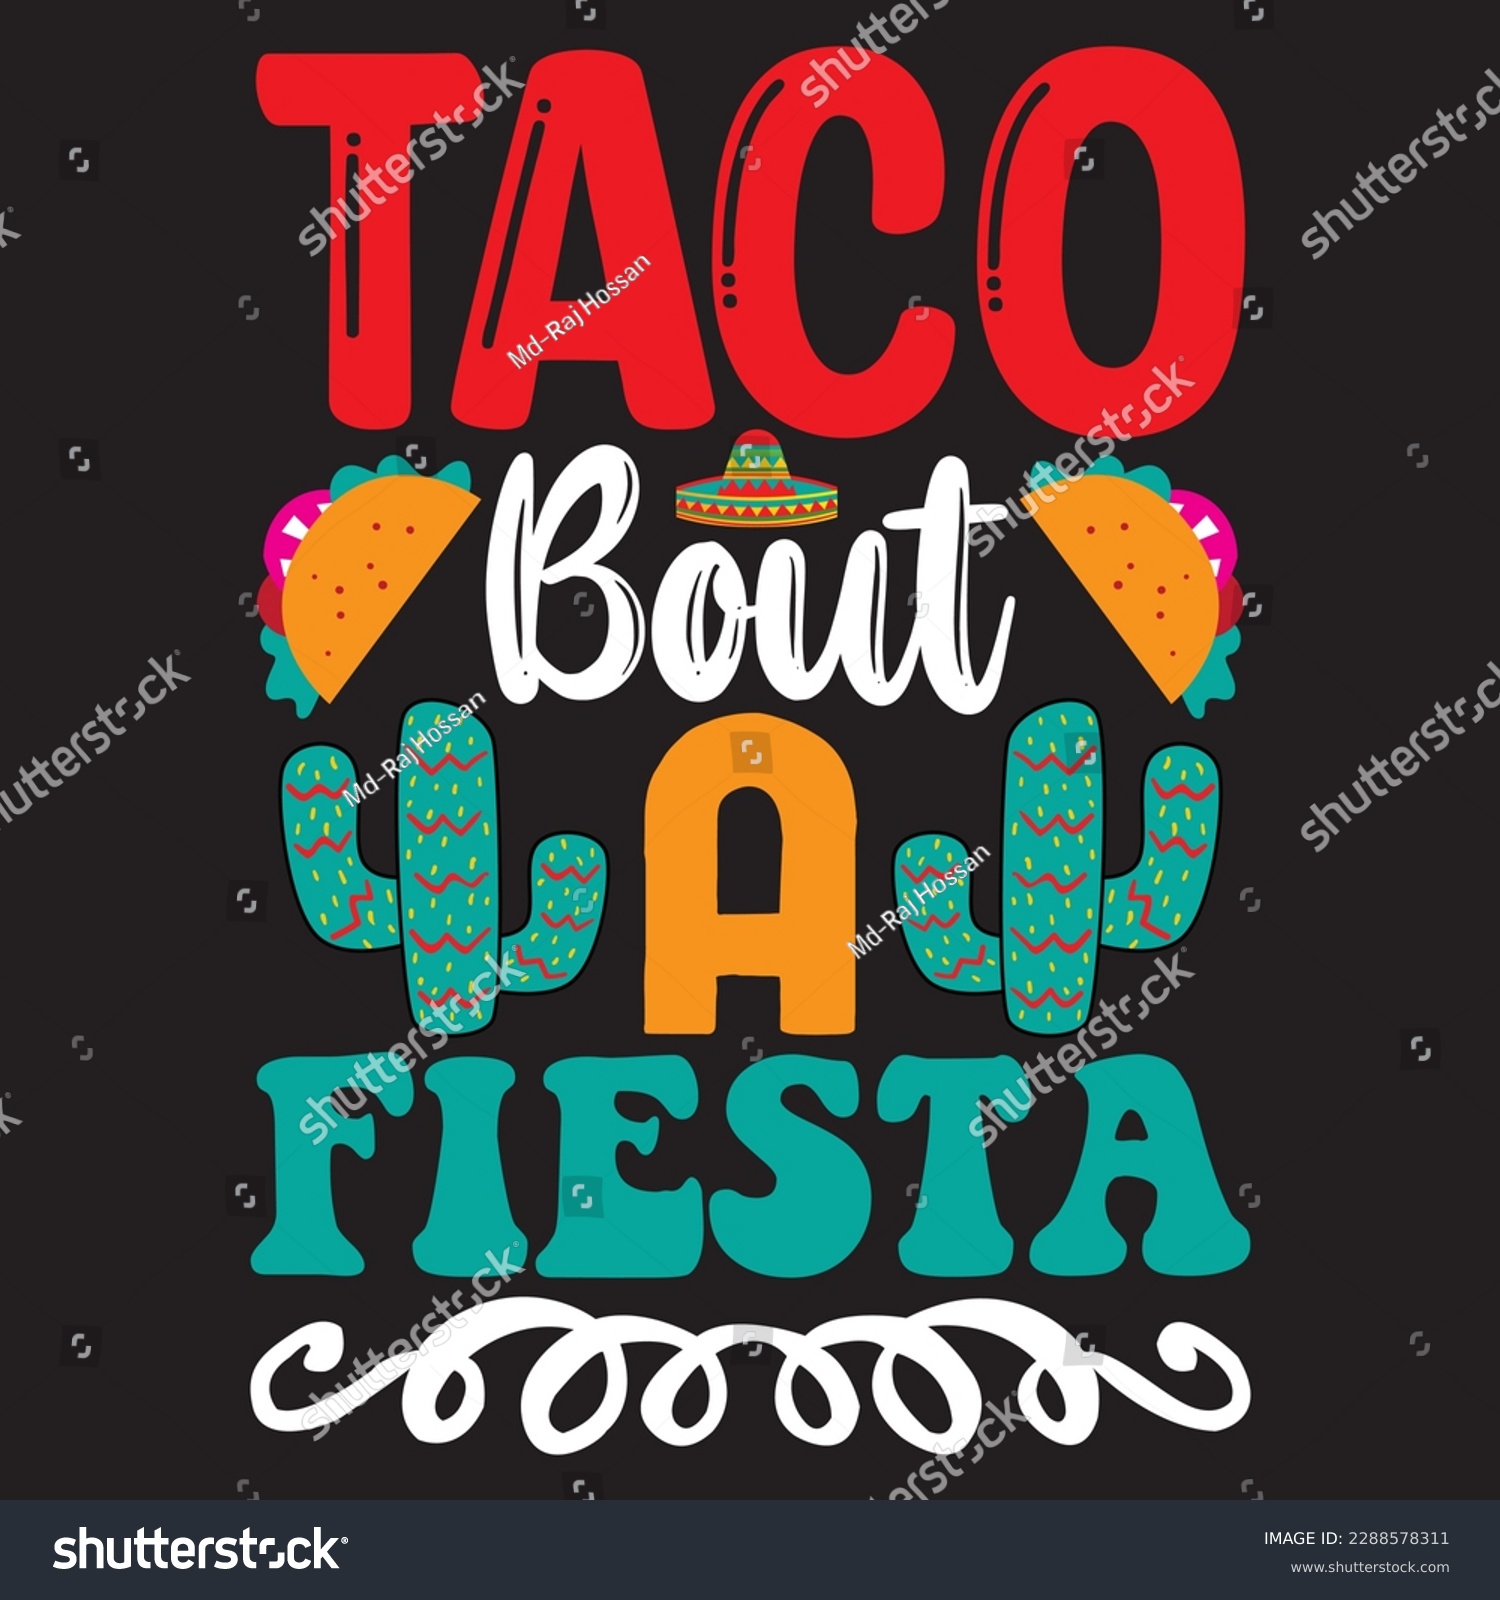 SVG of Taco Bout a Fiesta T-shirt Design Vector File svg